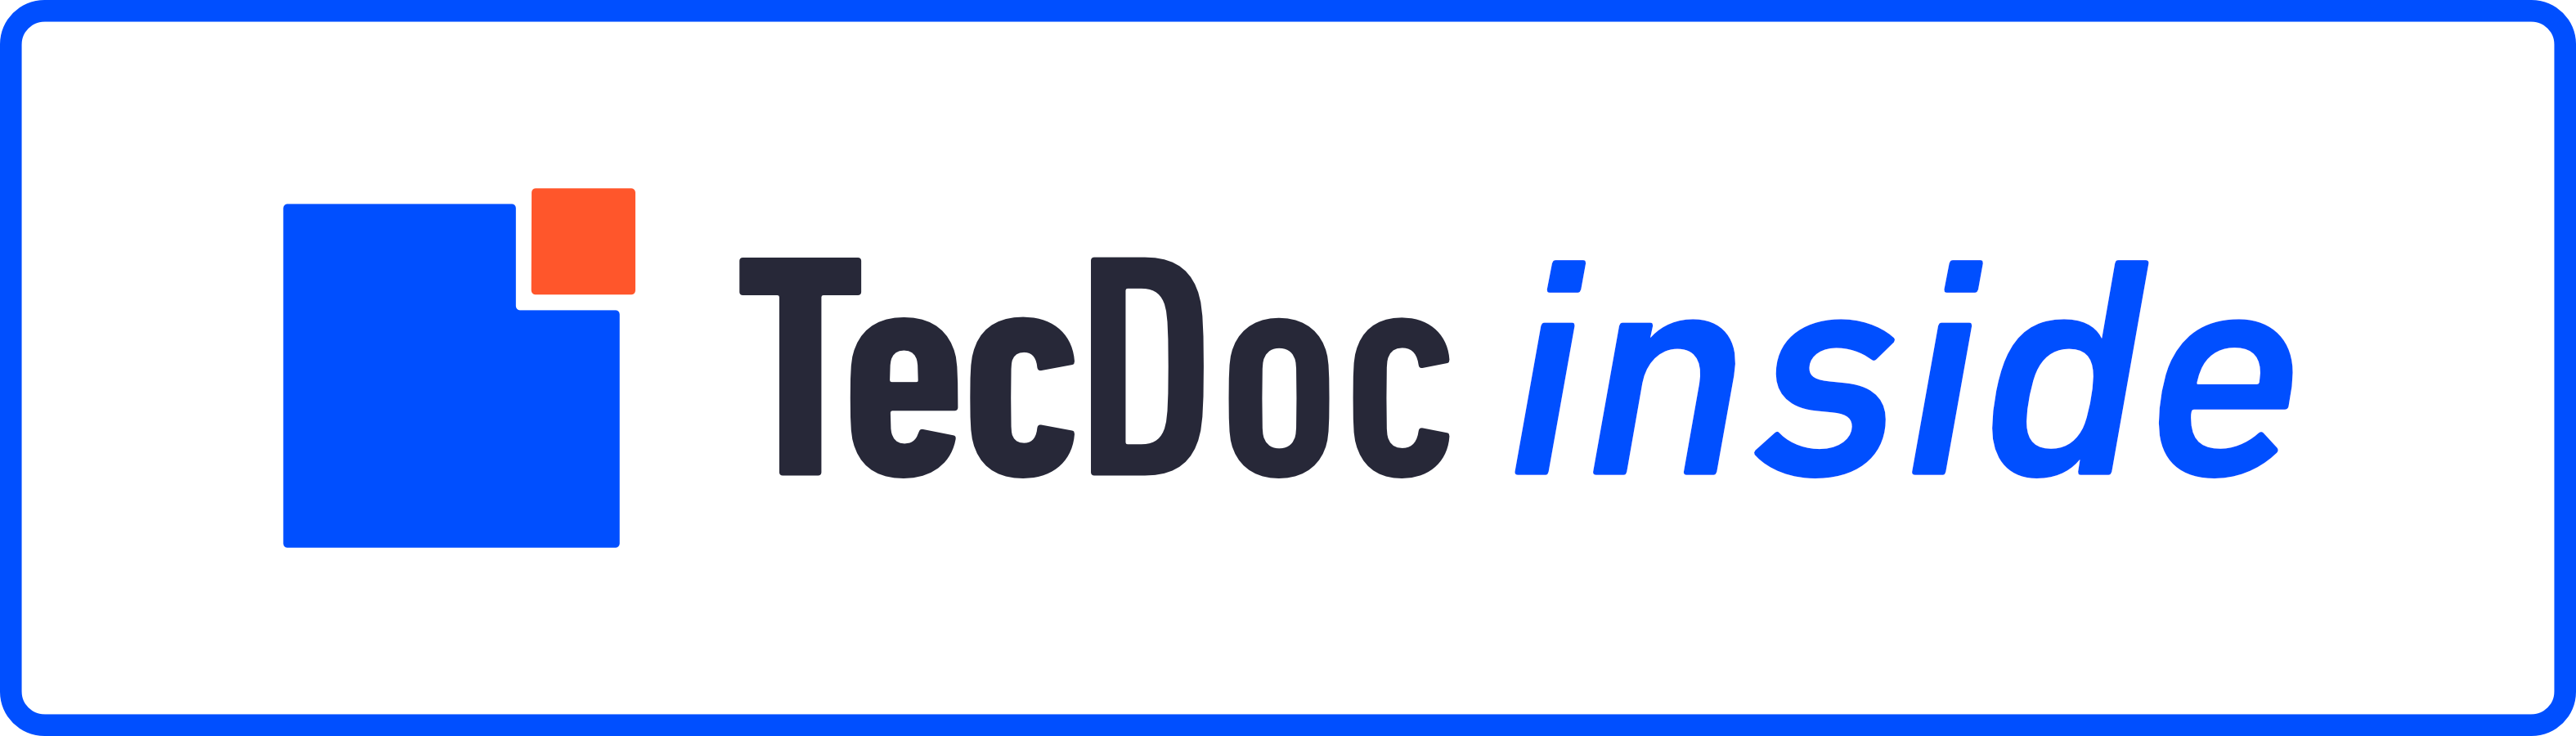 supported by TecDoc